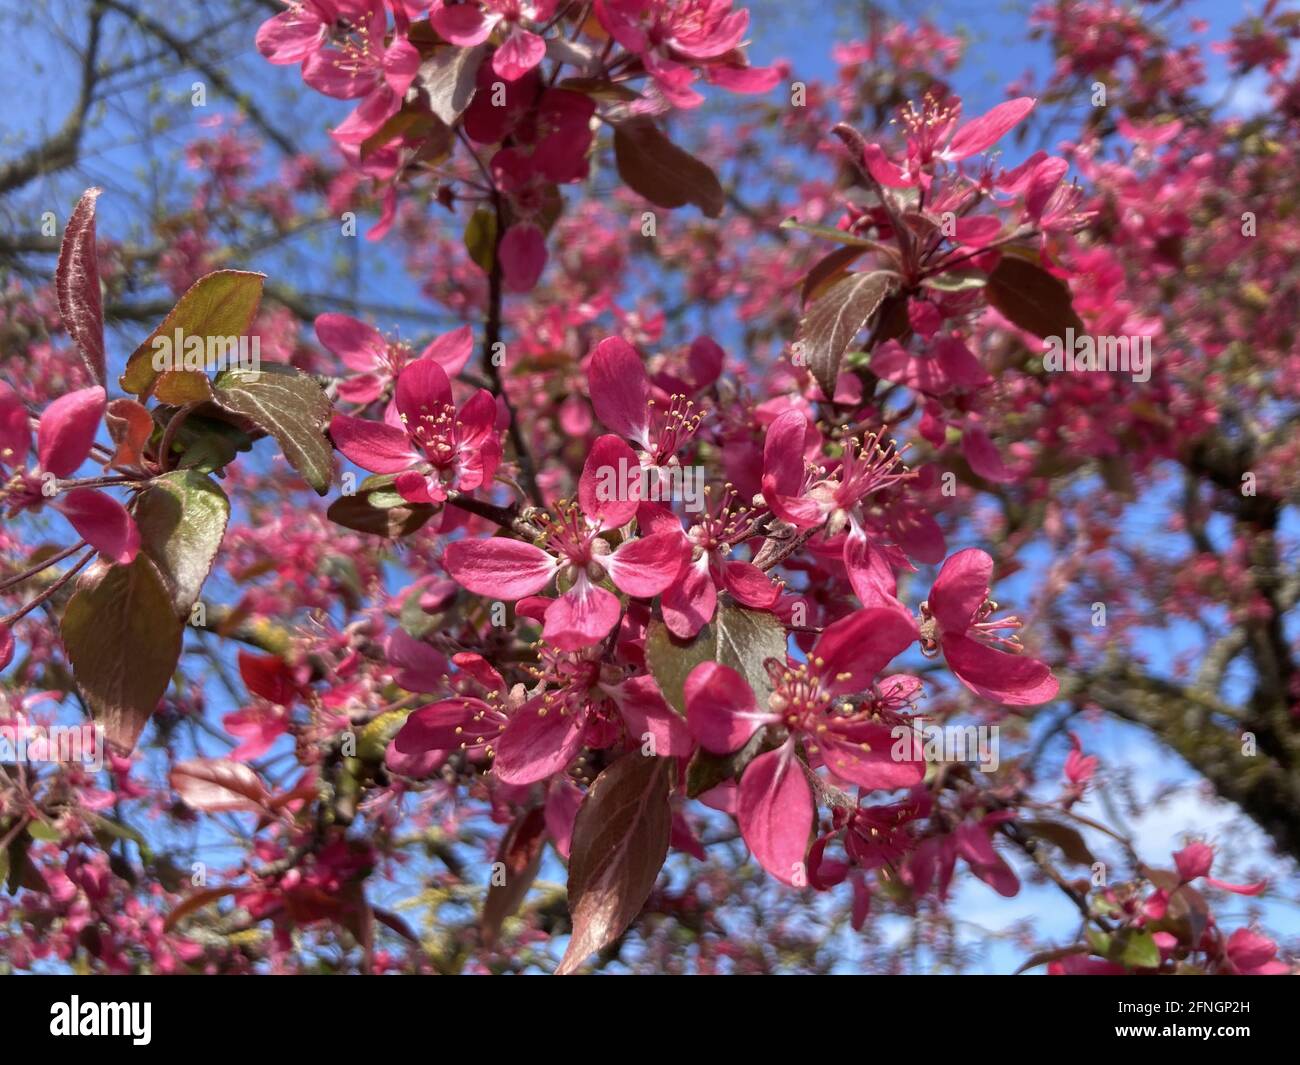 Closeup shot of pink blossom flowers on a Niedzwetzky's apple tree Stock Photo